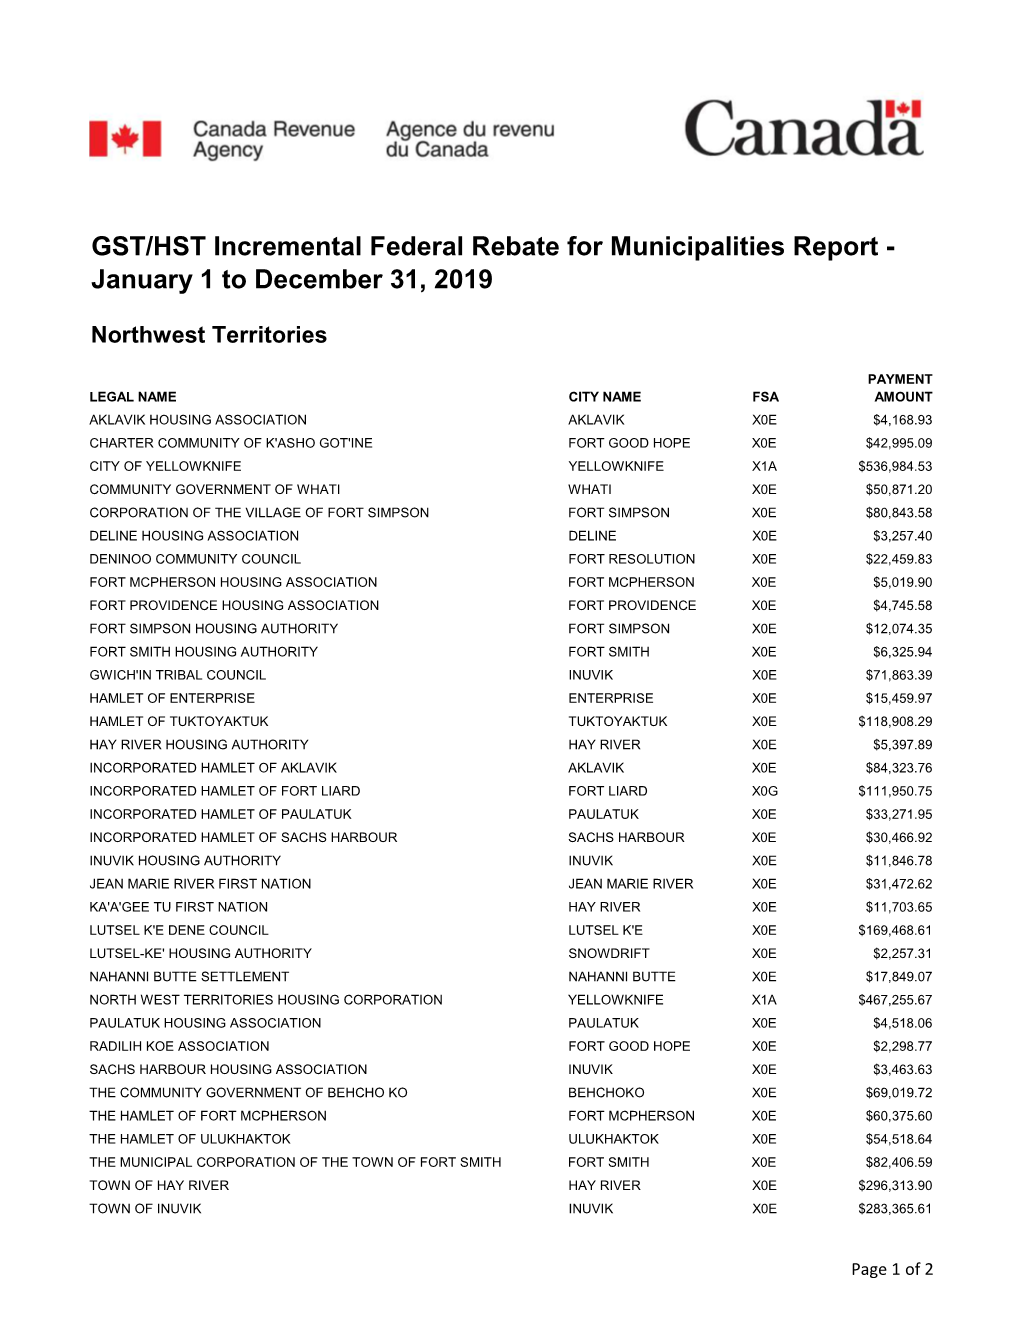 GST/HST Incremental Federal Rebate for Municipalities Report - January 1 to December 31, 2019